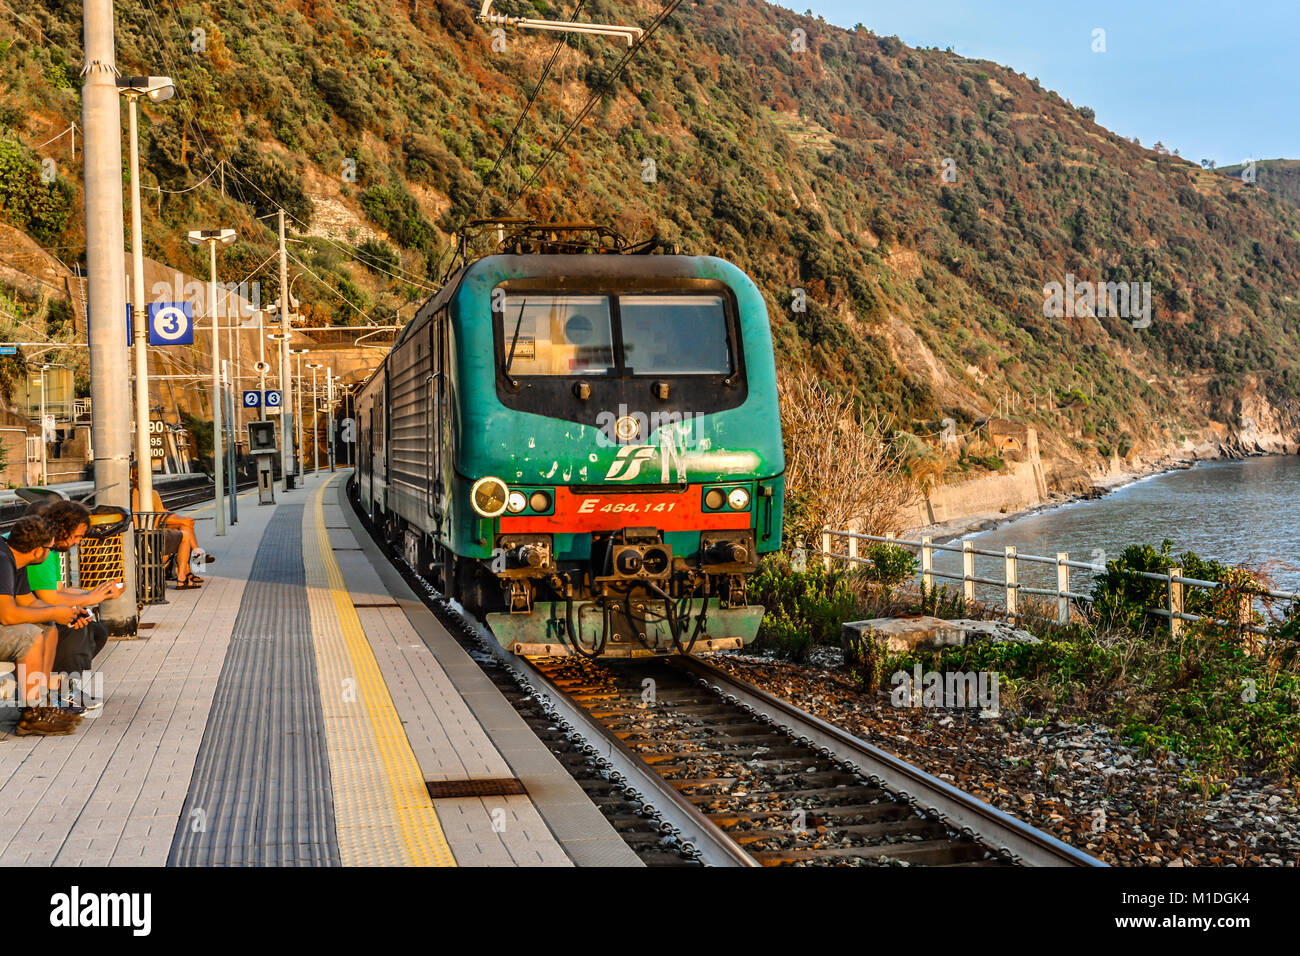 A train travels into the Monterosso al Mare train station on the Cinque Terre coast of Italy as travelers sit and enjoy a warm day in early autumn Stock Photo